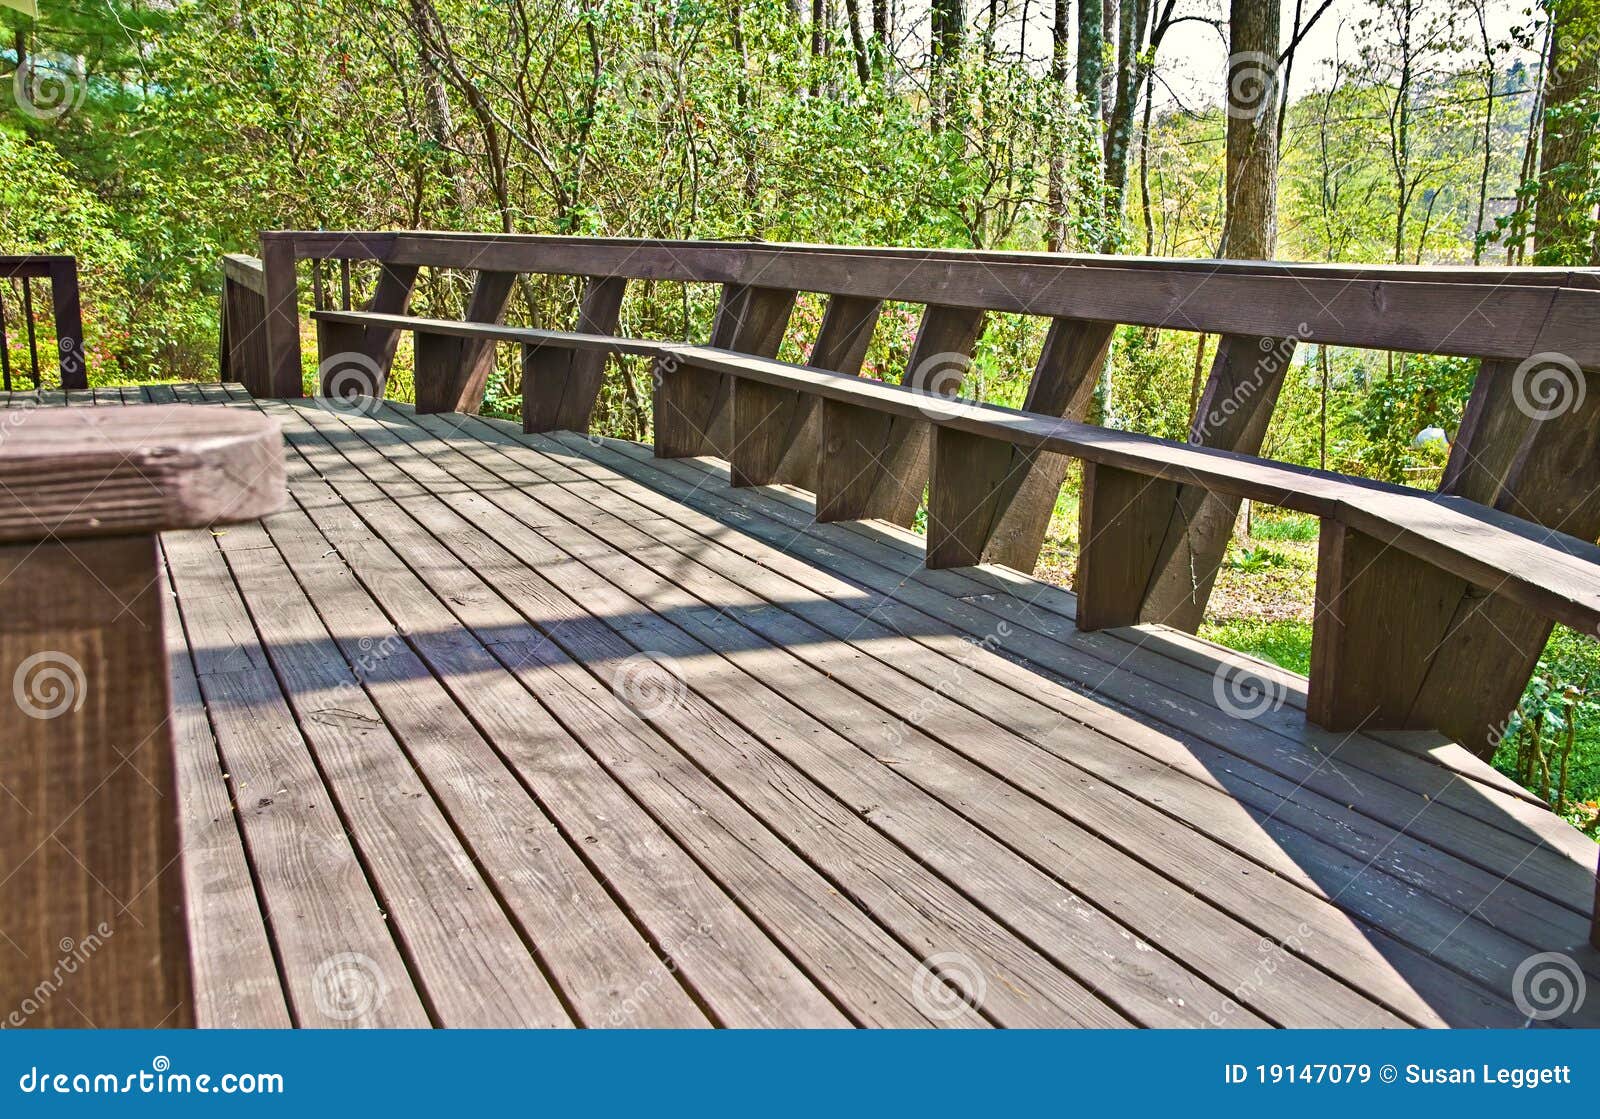 Wood Deck Design With Bench. Stock Image - Image of board ...